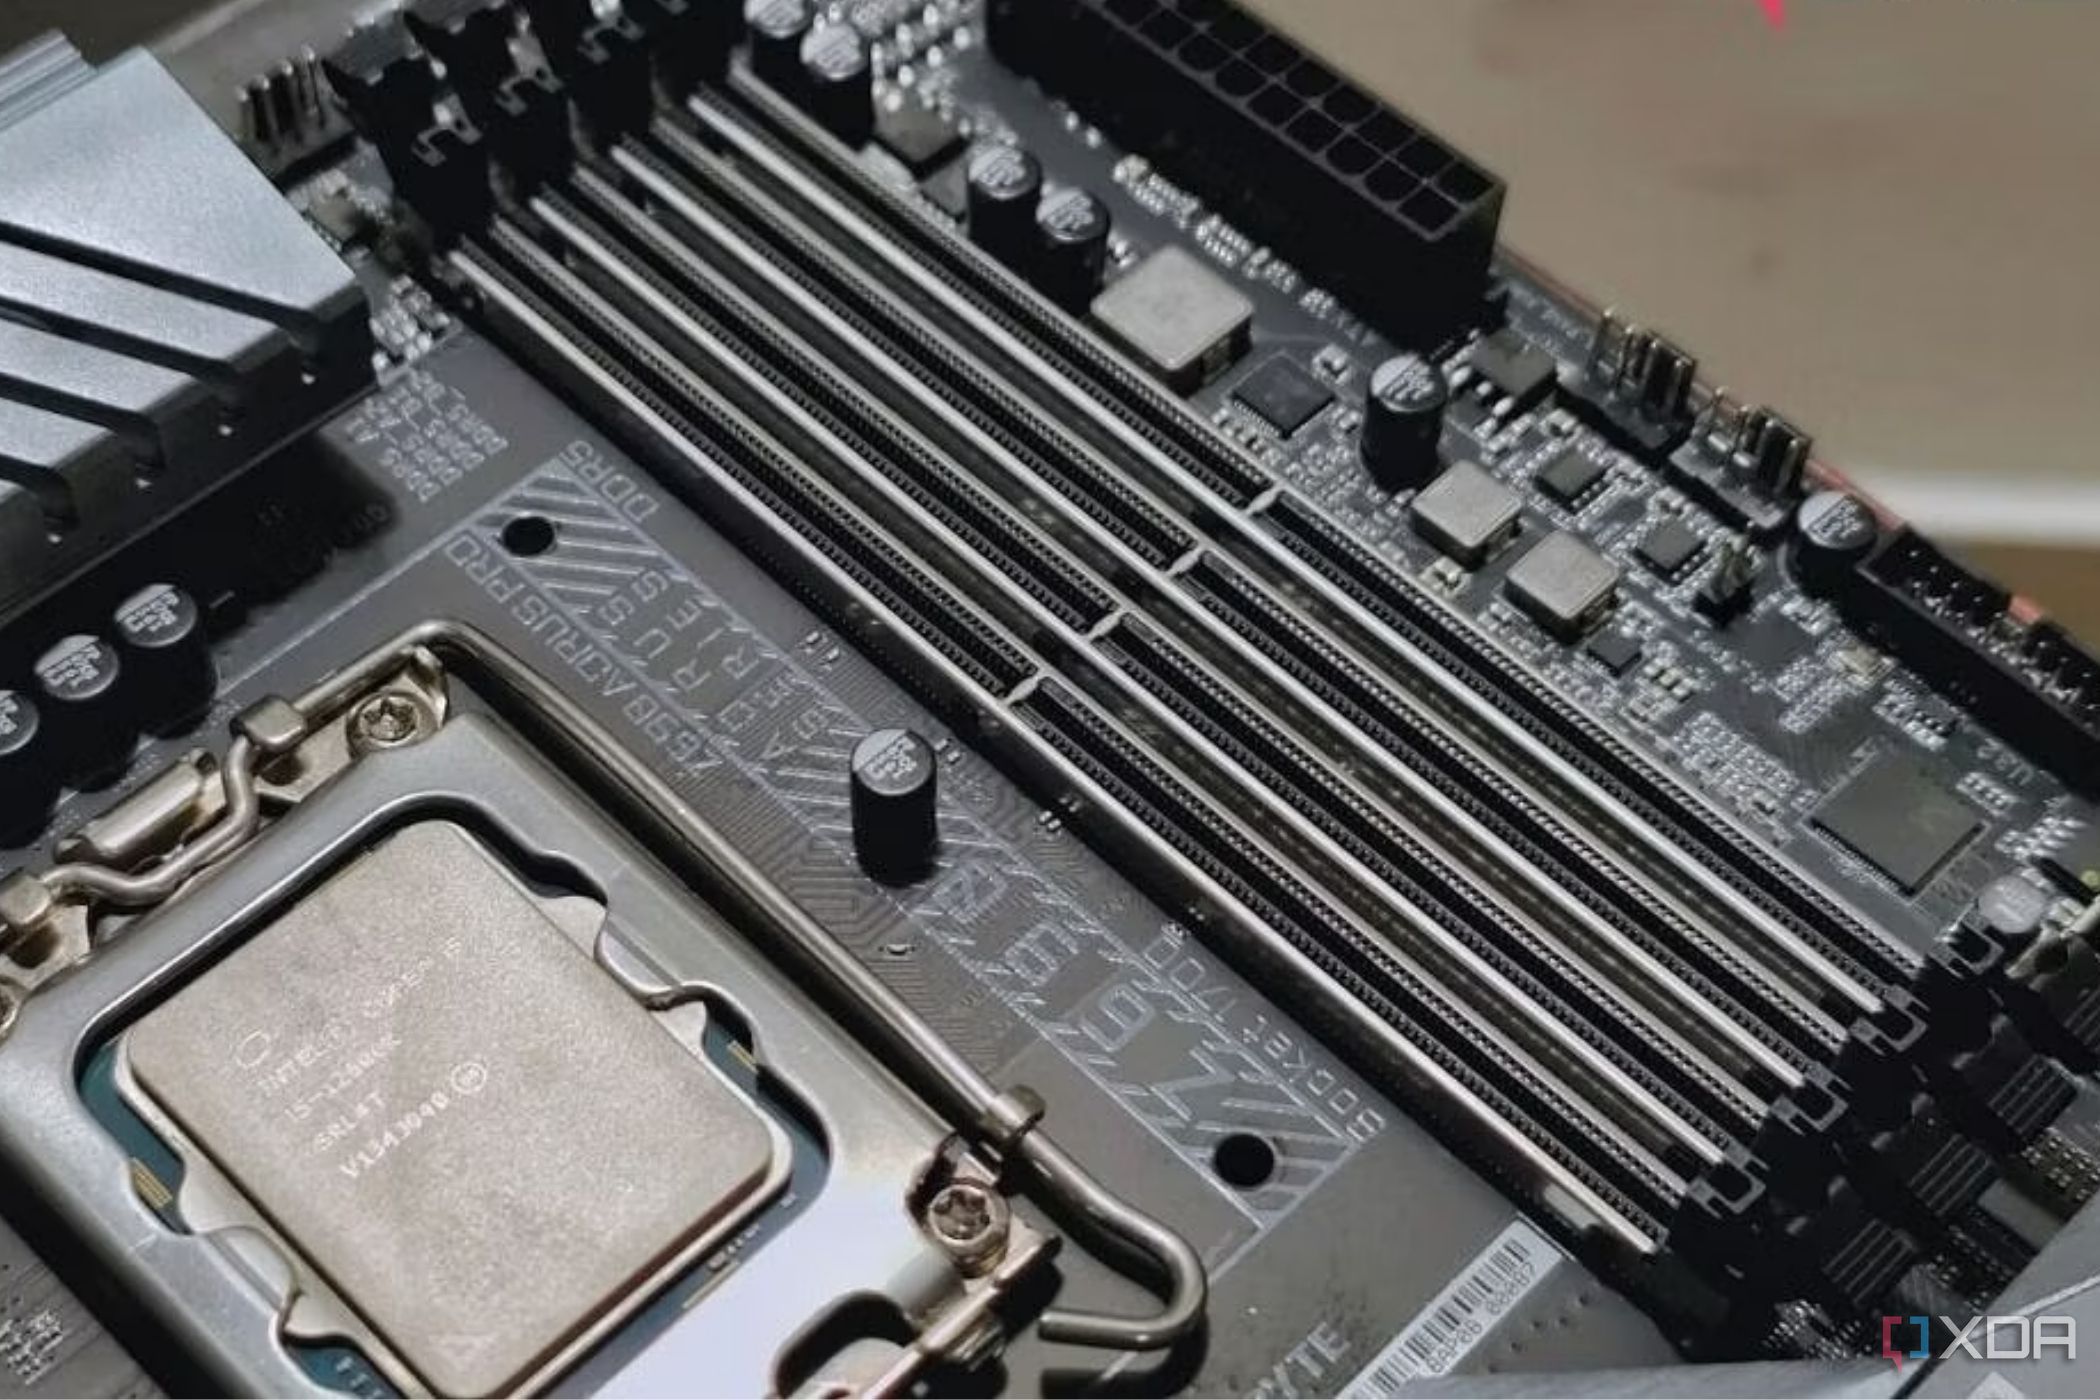 Building a PC is about to get pricier, but not for the reasons you think